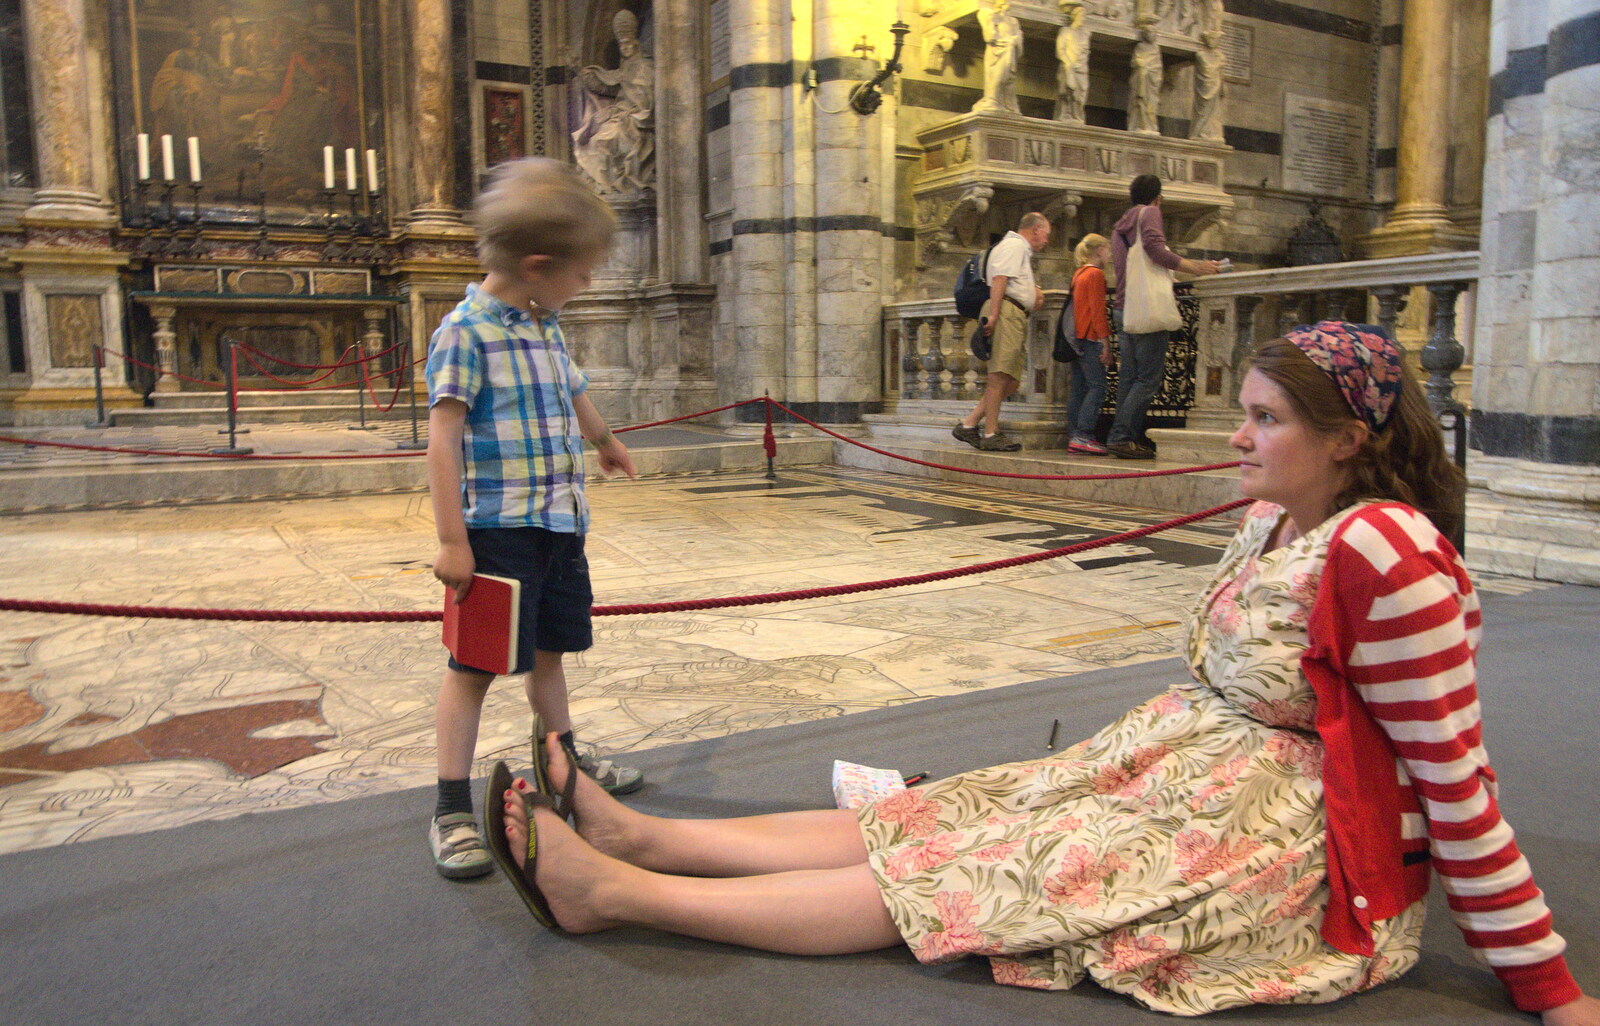 A Tuscan Winery and a Trip to Siena, Tuscany, Italy - 10th June 2013: Isobel on the floor